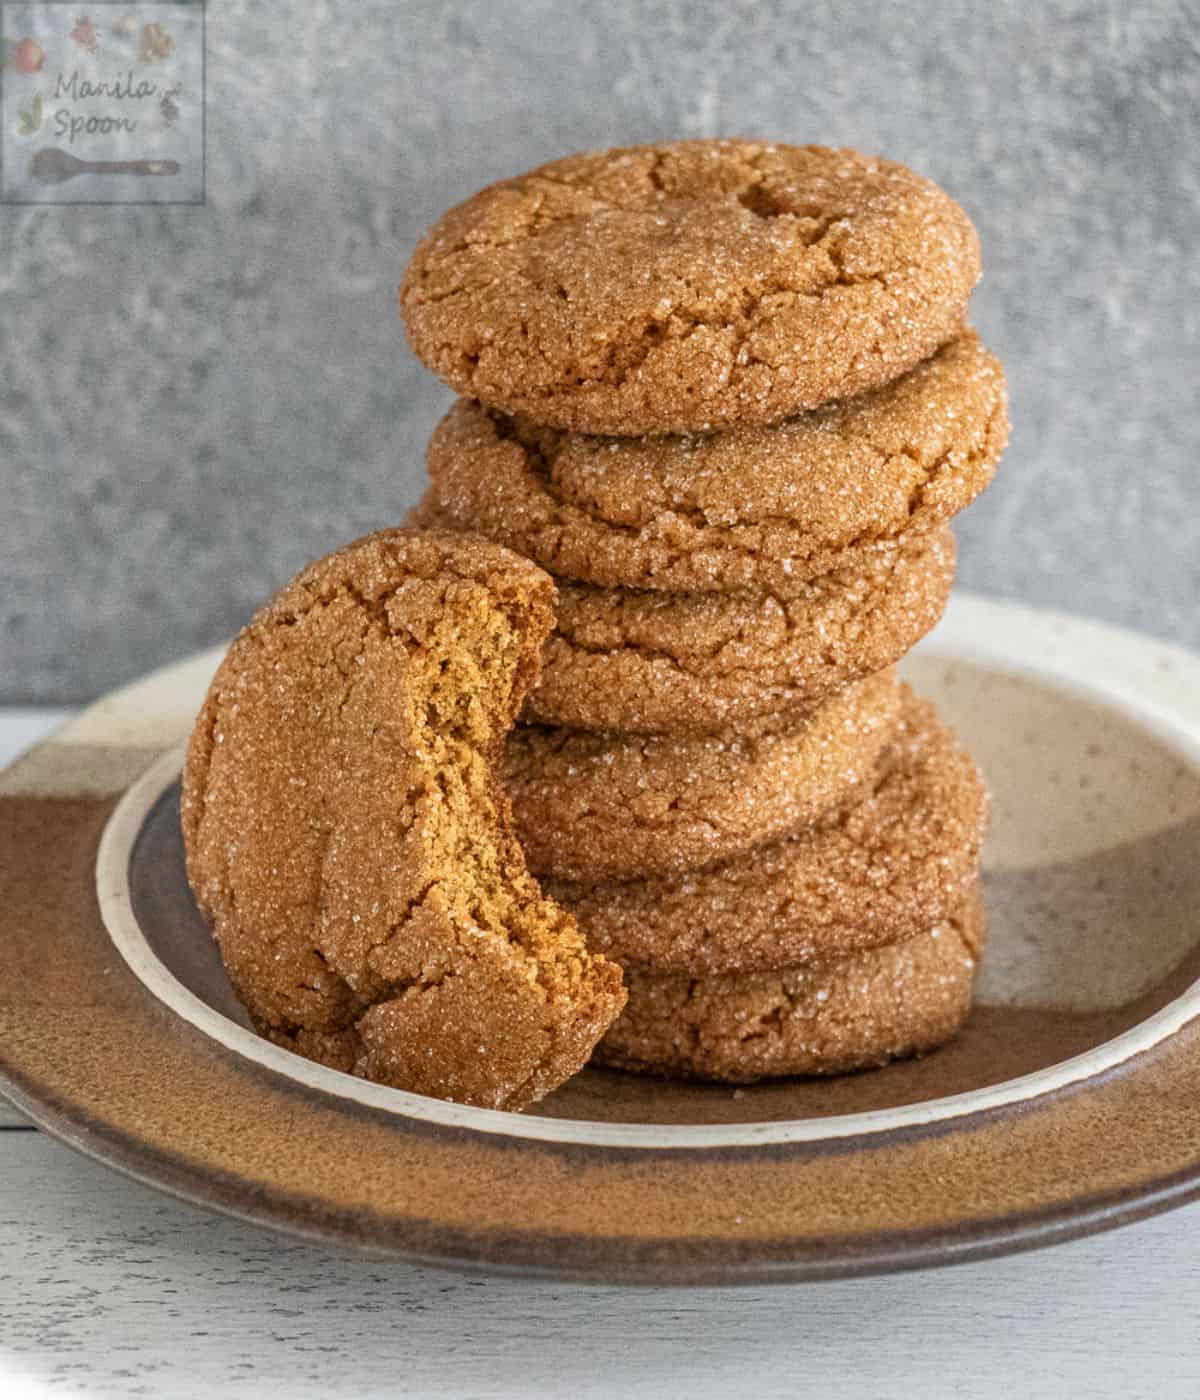 A pile of Spiced Cookies on a glass plate.